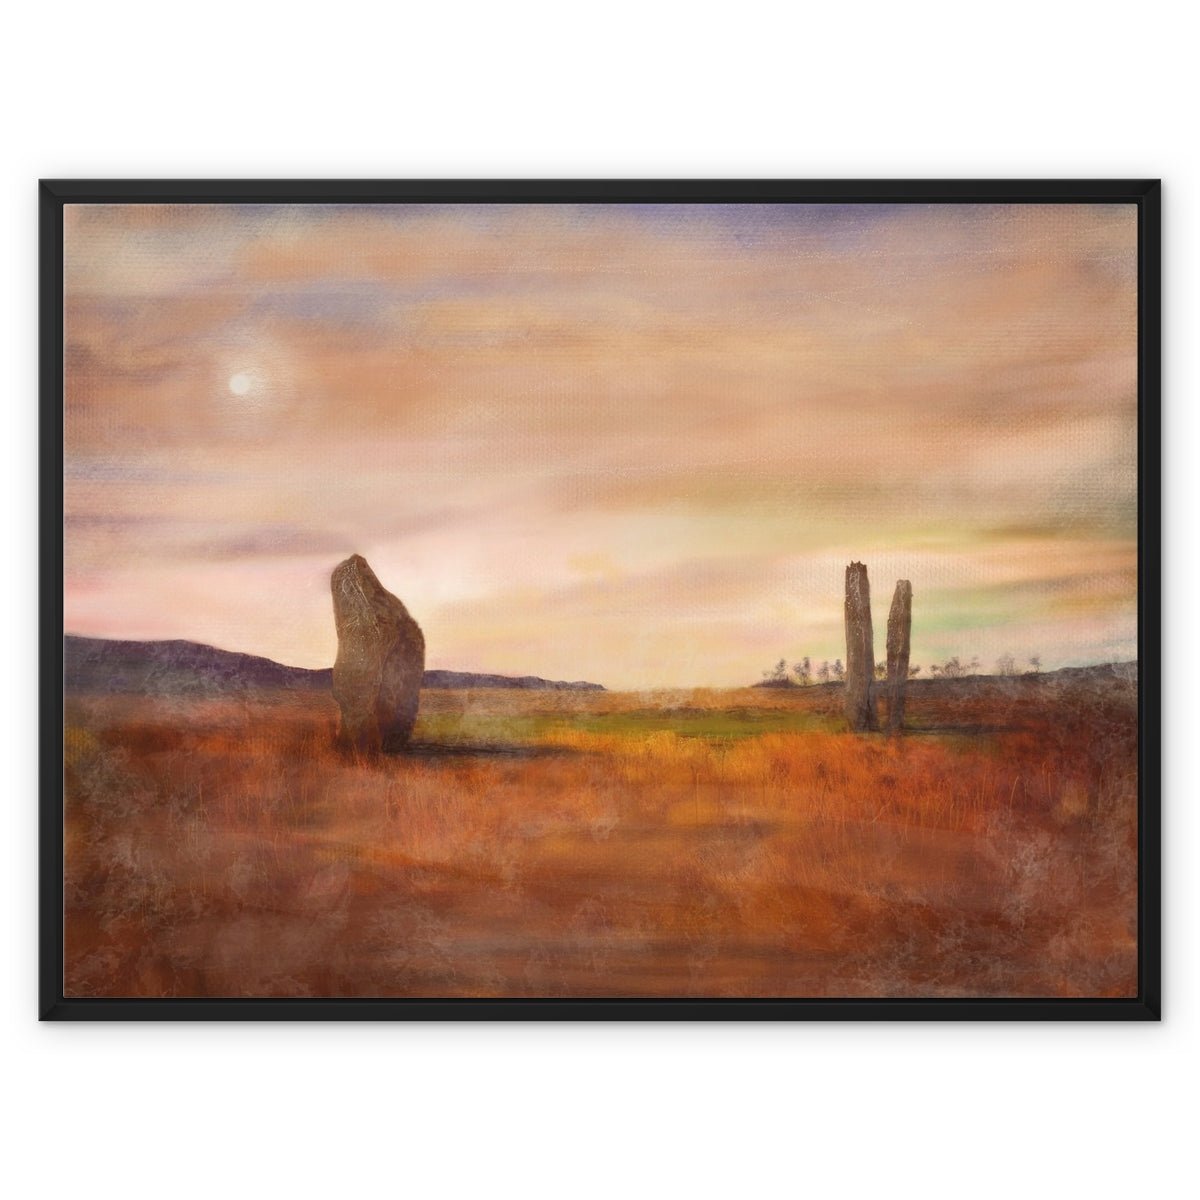 Machrie Moor Moonlight Painting | Framed Canvas From Scotland-Floating Framed Canvas Prints-Arran Art Gallery-32"x24"-Black Frame-Paintings, Prints, Homeware, Art Gifts From Scotland By Scottish Artist Kevin Hunter